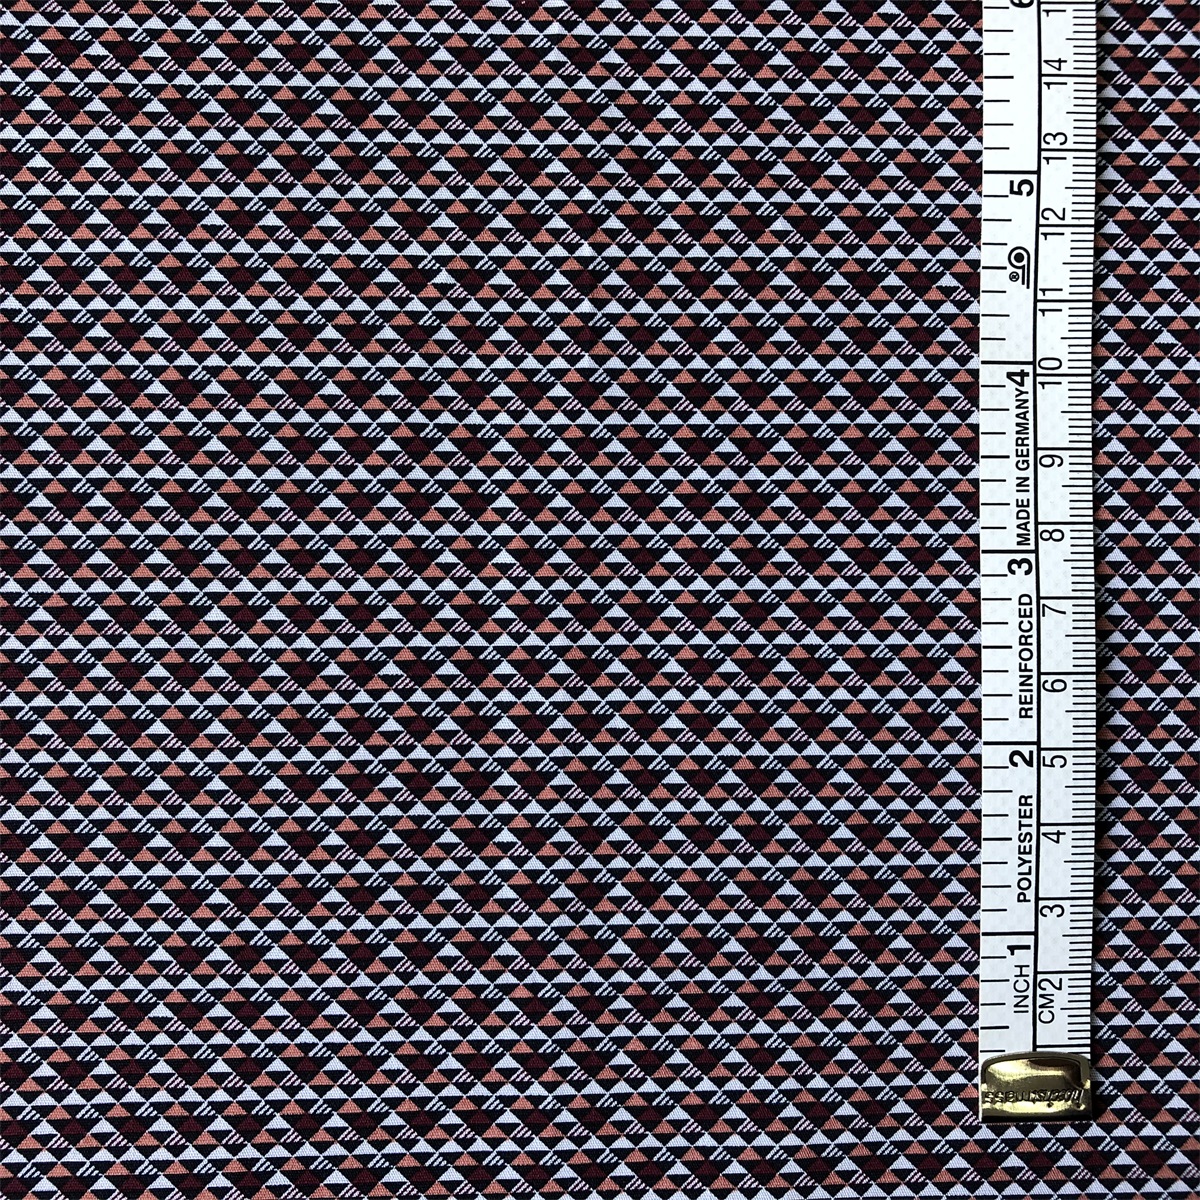 Sun-rising Textile Cotton Printed fabric customized new design 100%cotton poplin printed fabric for men's long sleeve shirts